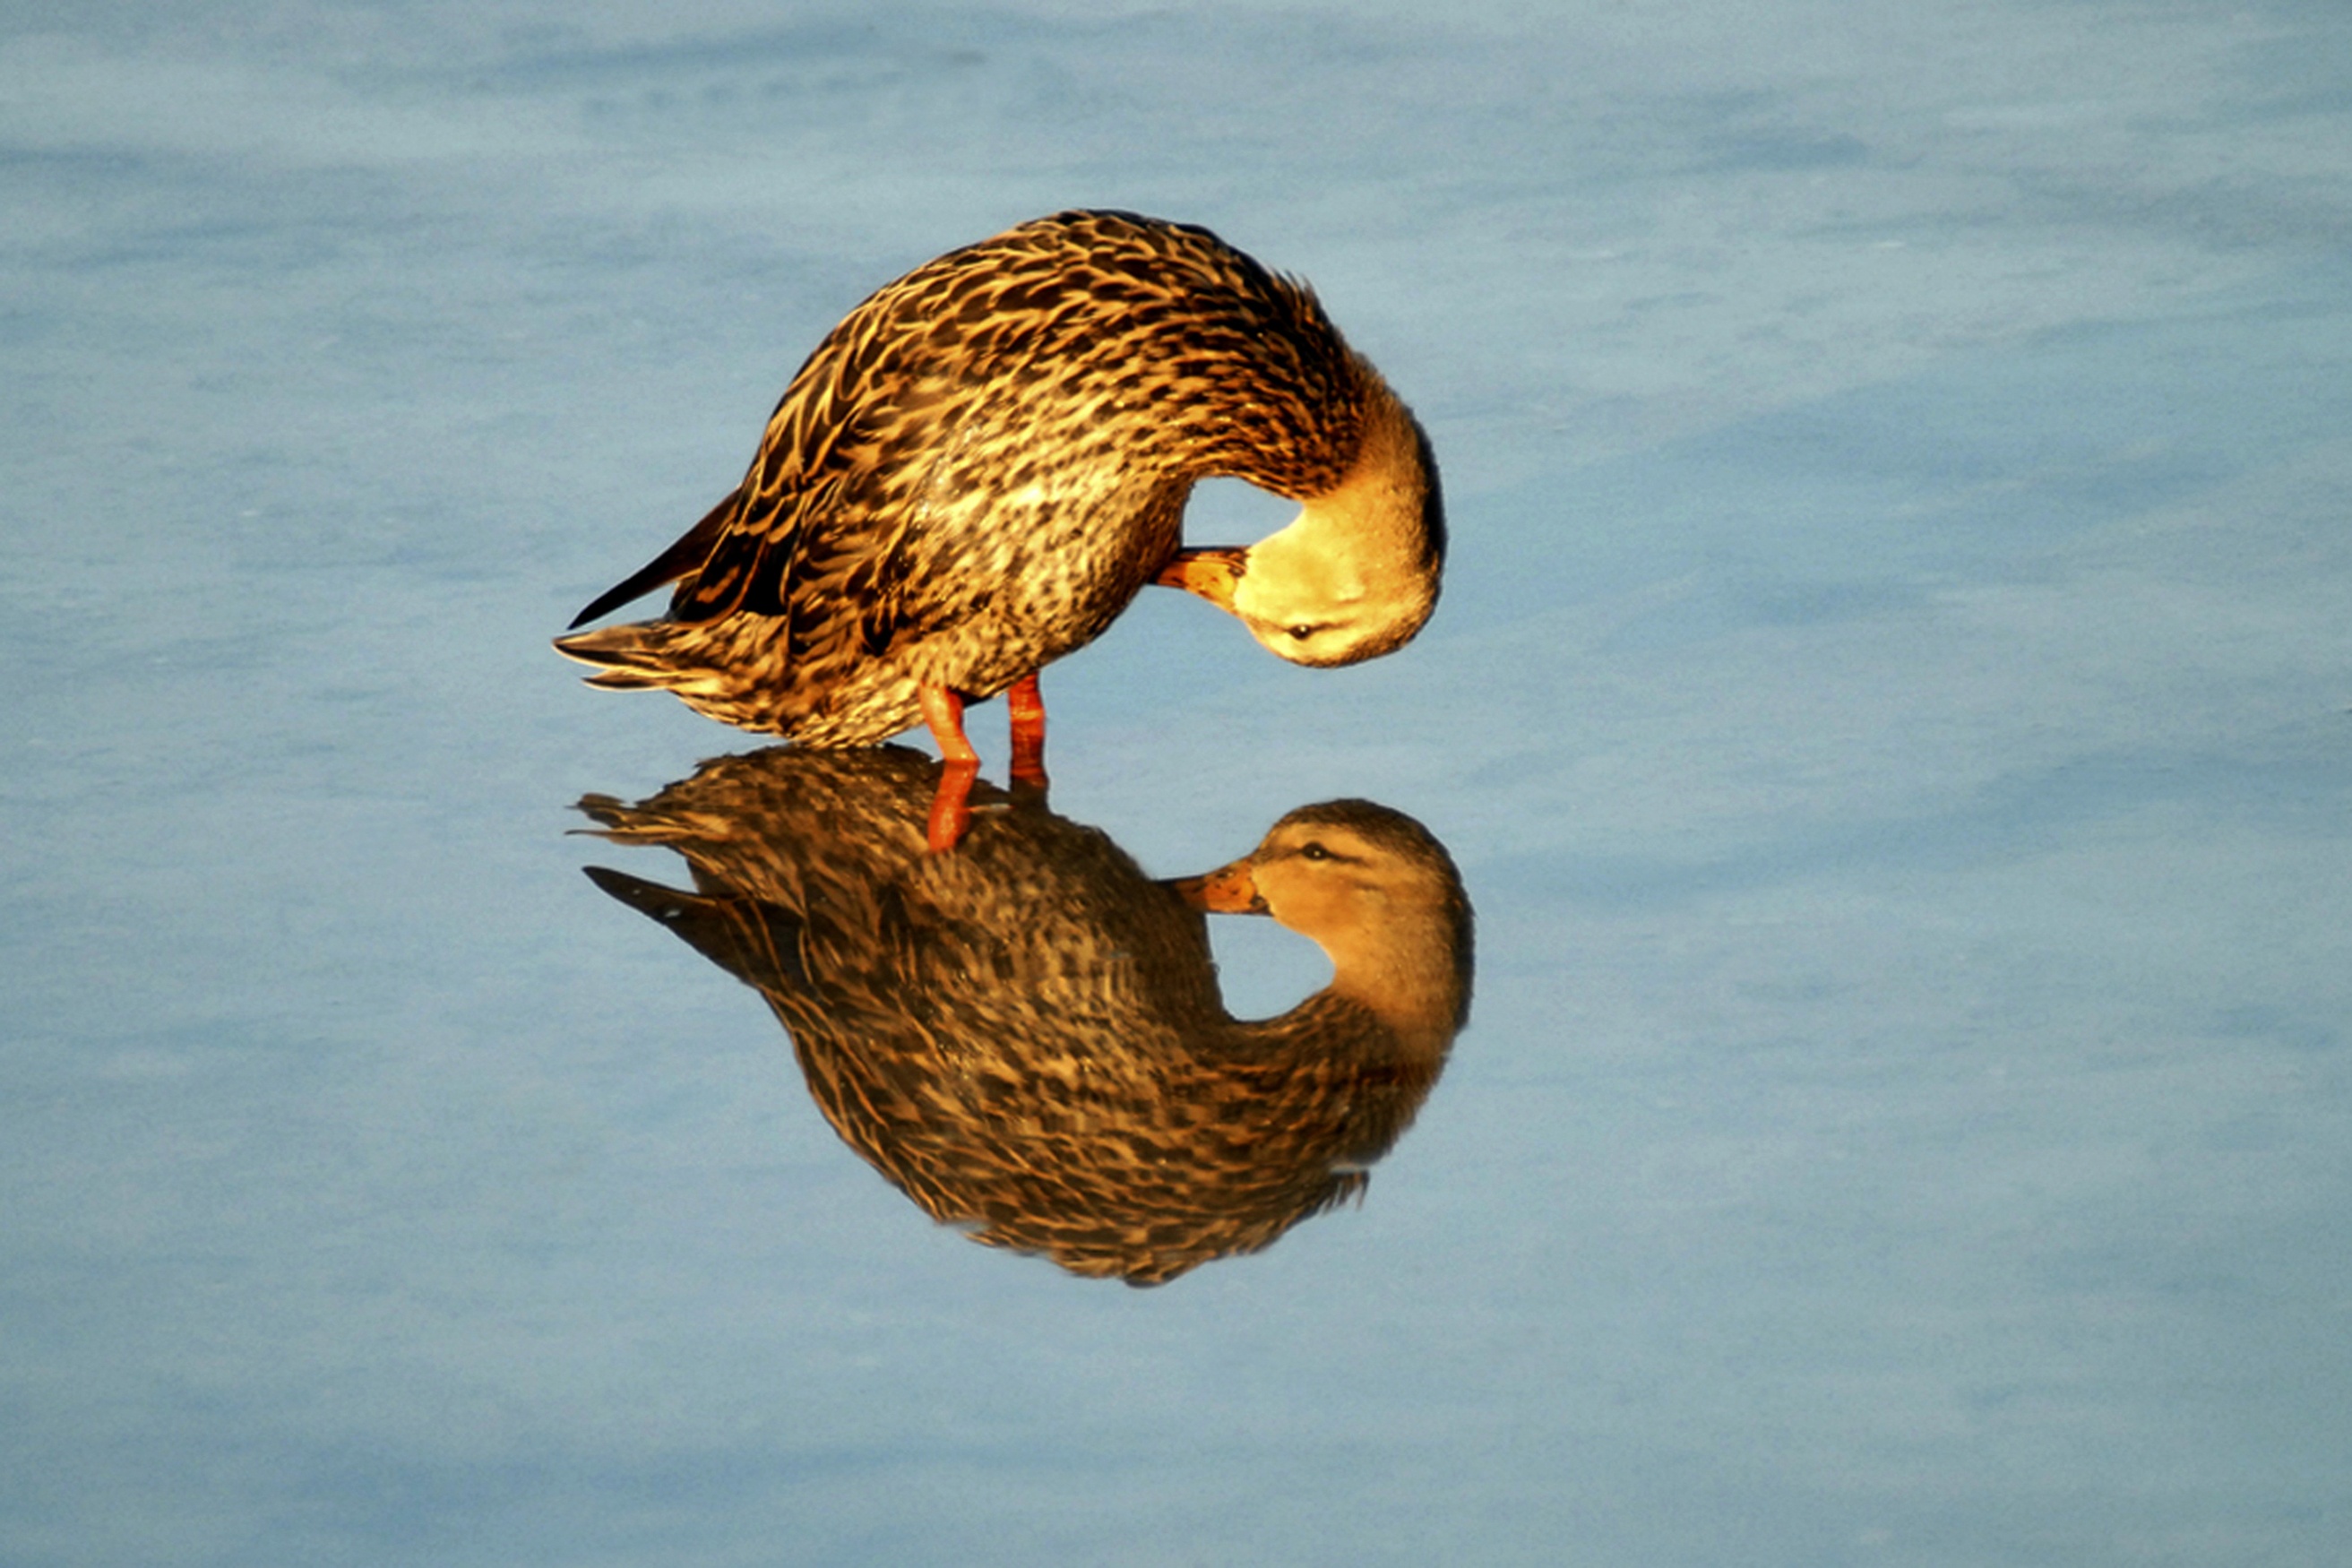 Nature's “Mirror Mirror”: 13 Spectacular Photos with Water